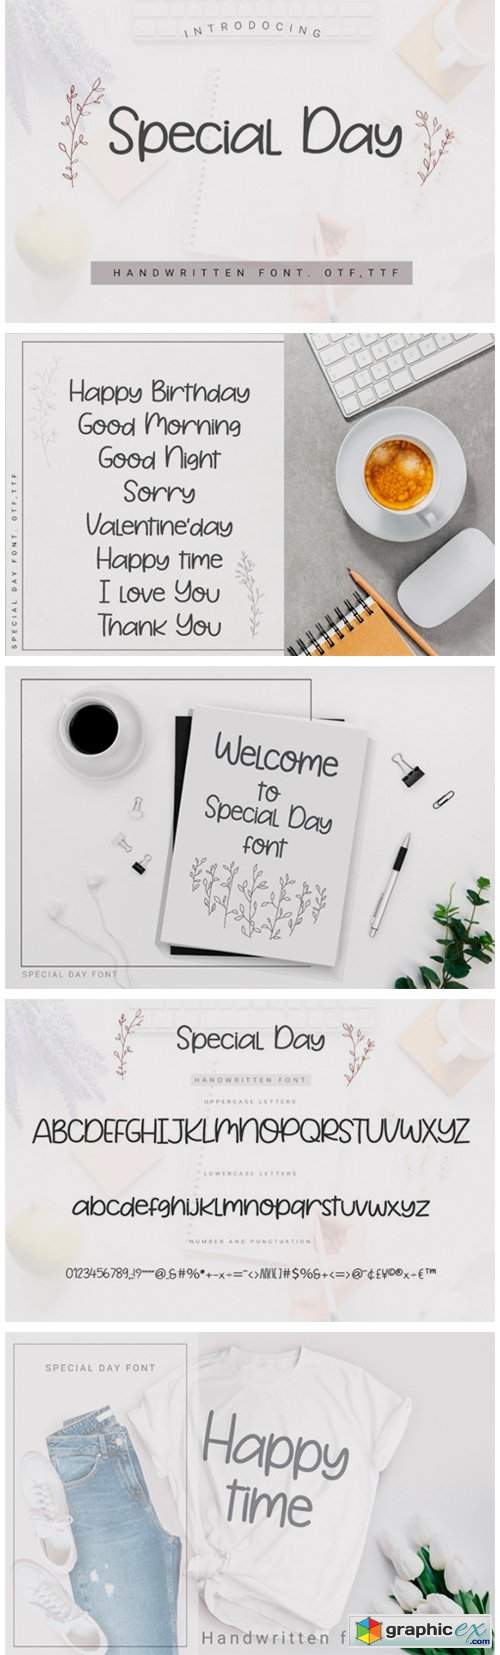  Special Day Font 